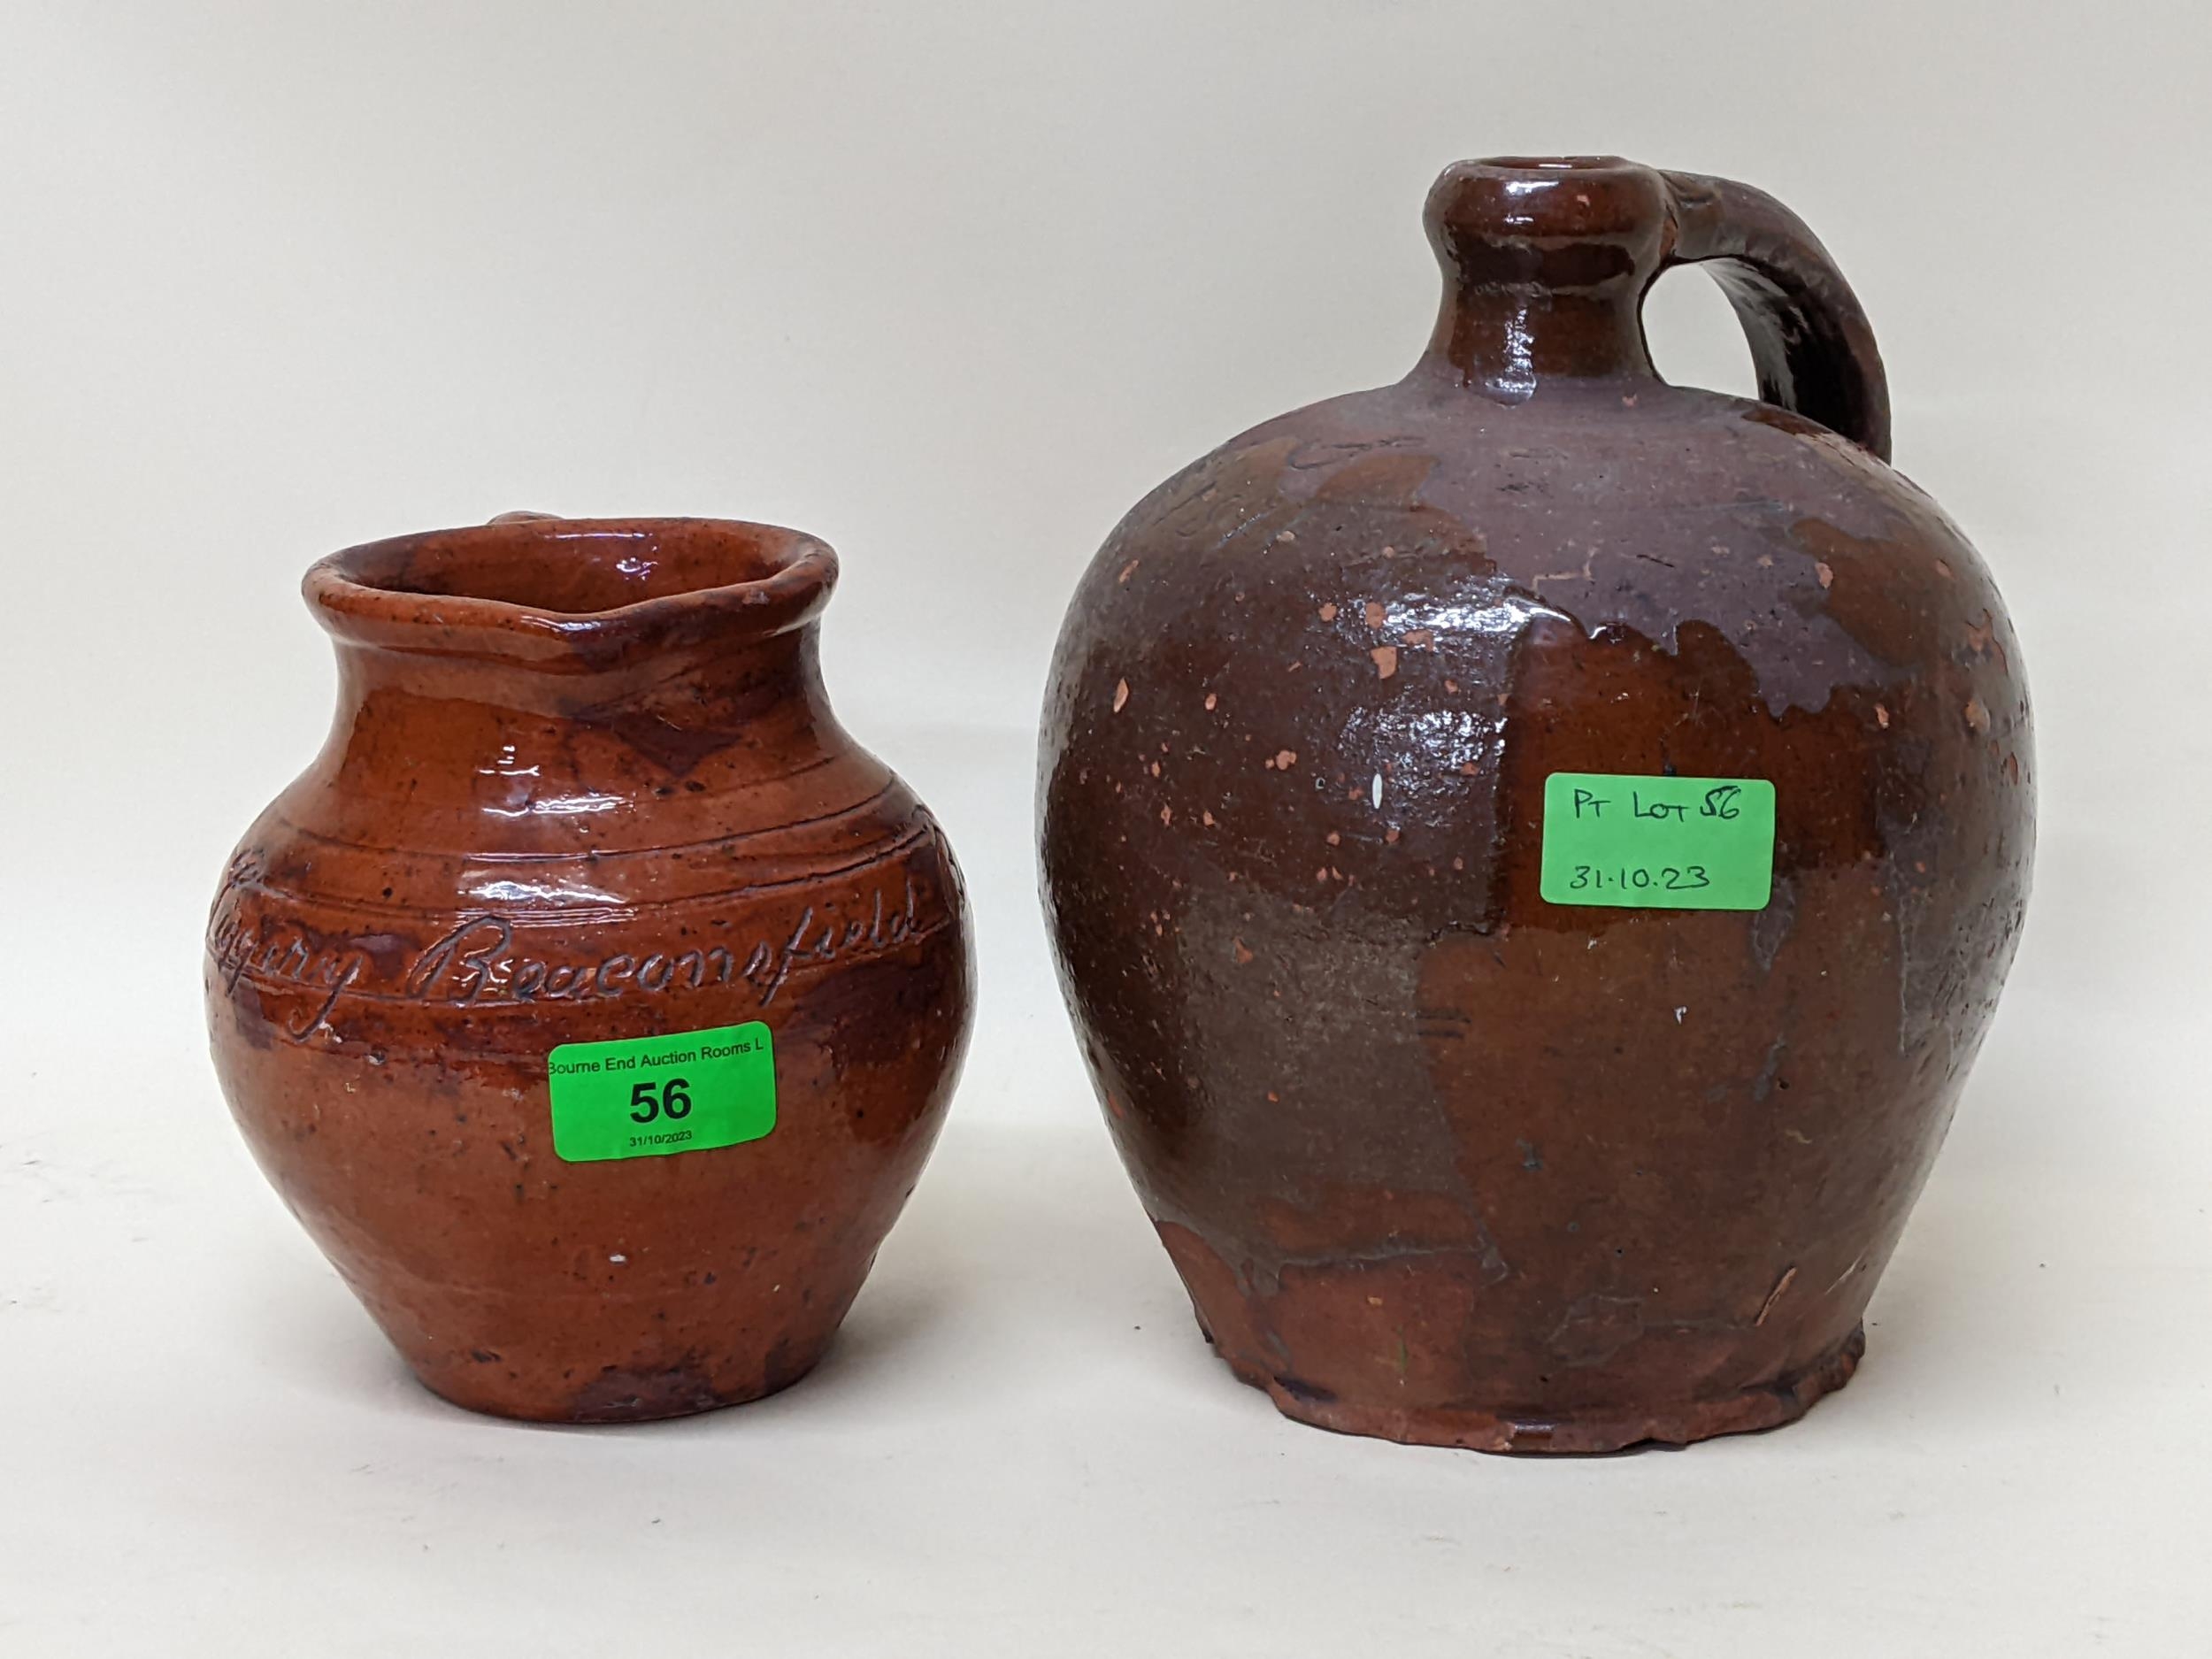 A pottery jug inscribed John Tiggery, Beaconsfield, Bucks, 1885 and another similar initialled G.S.